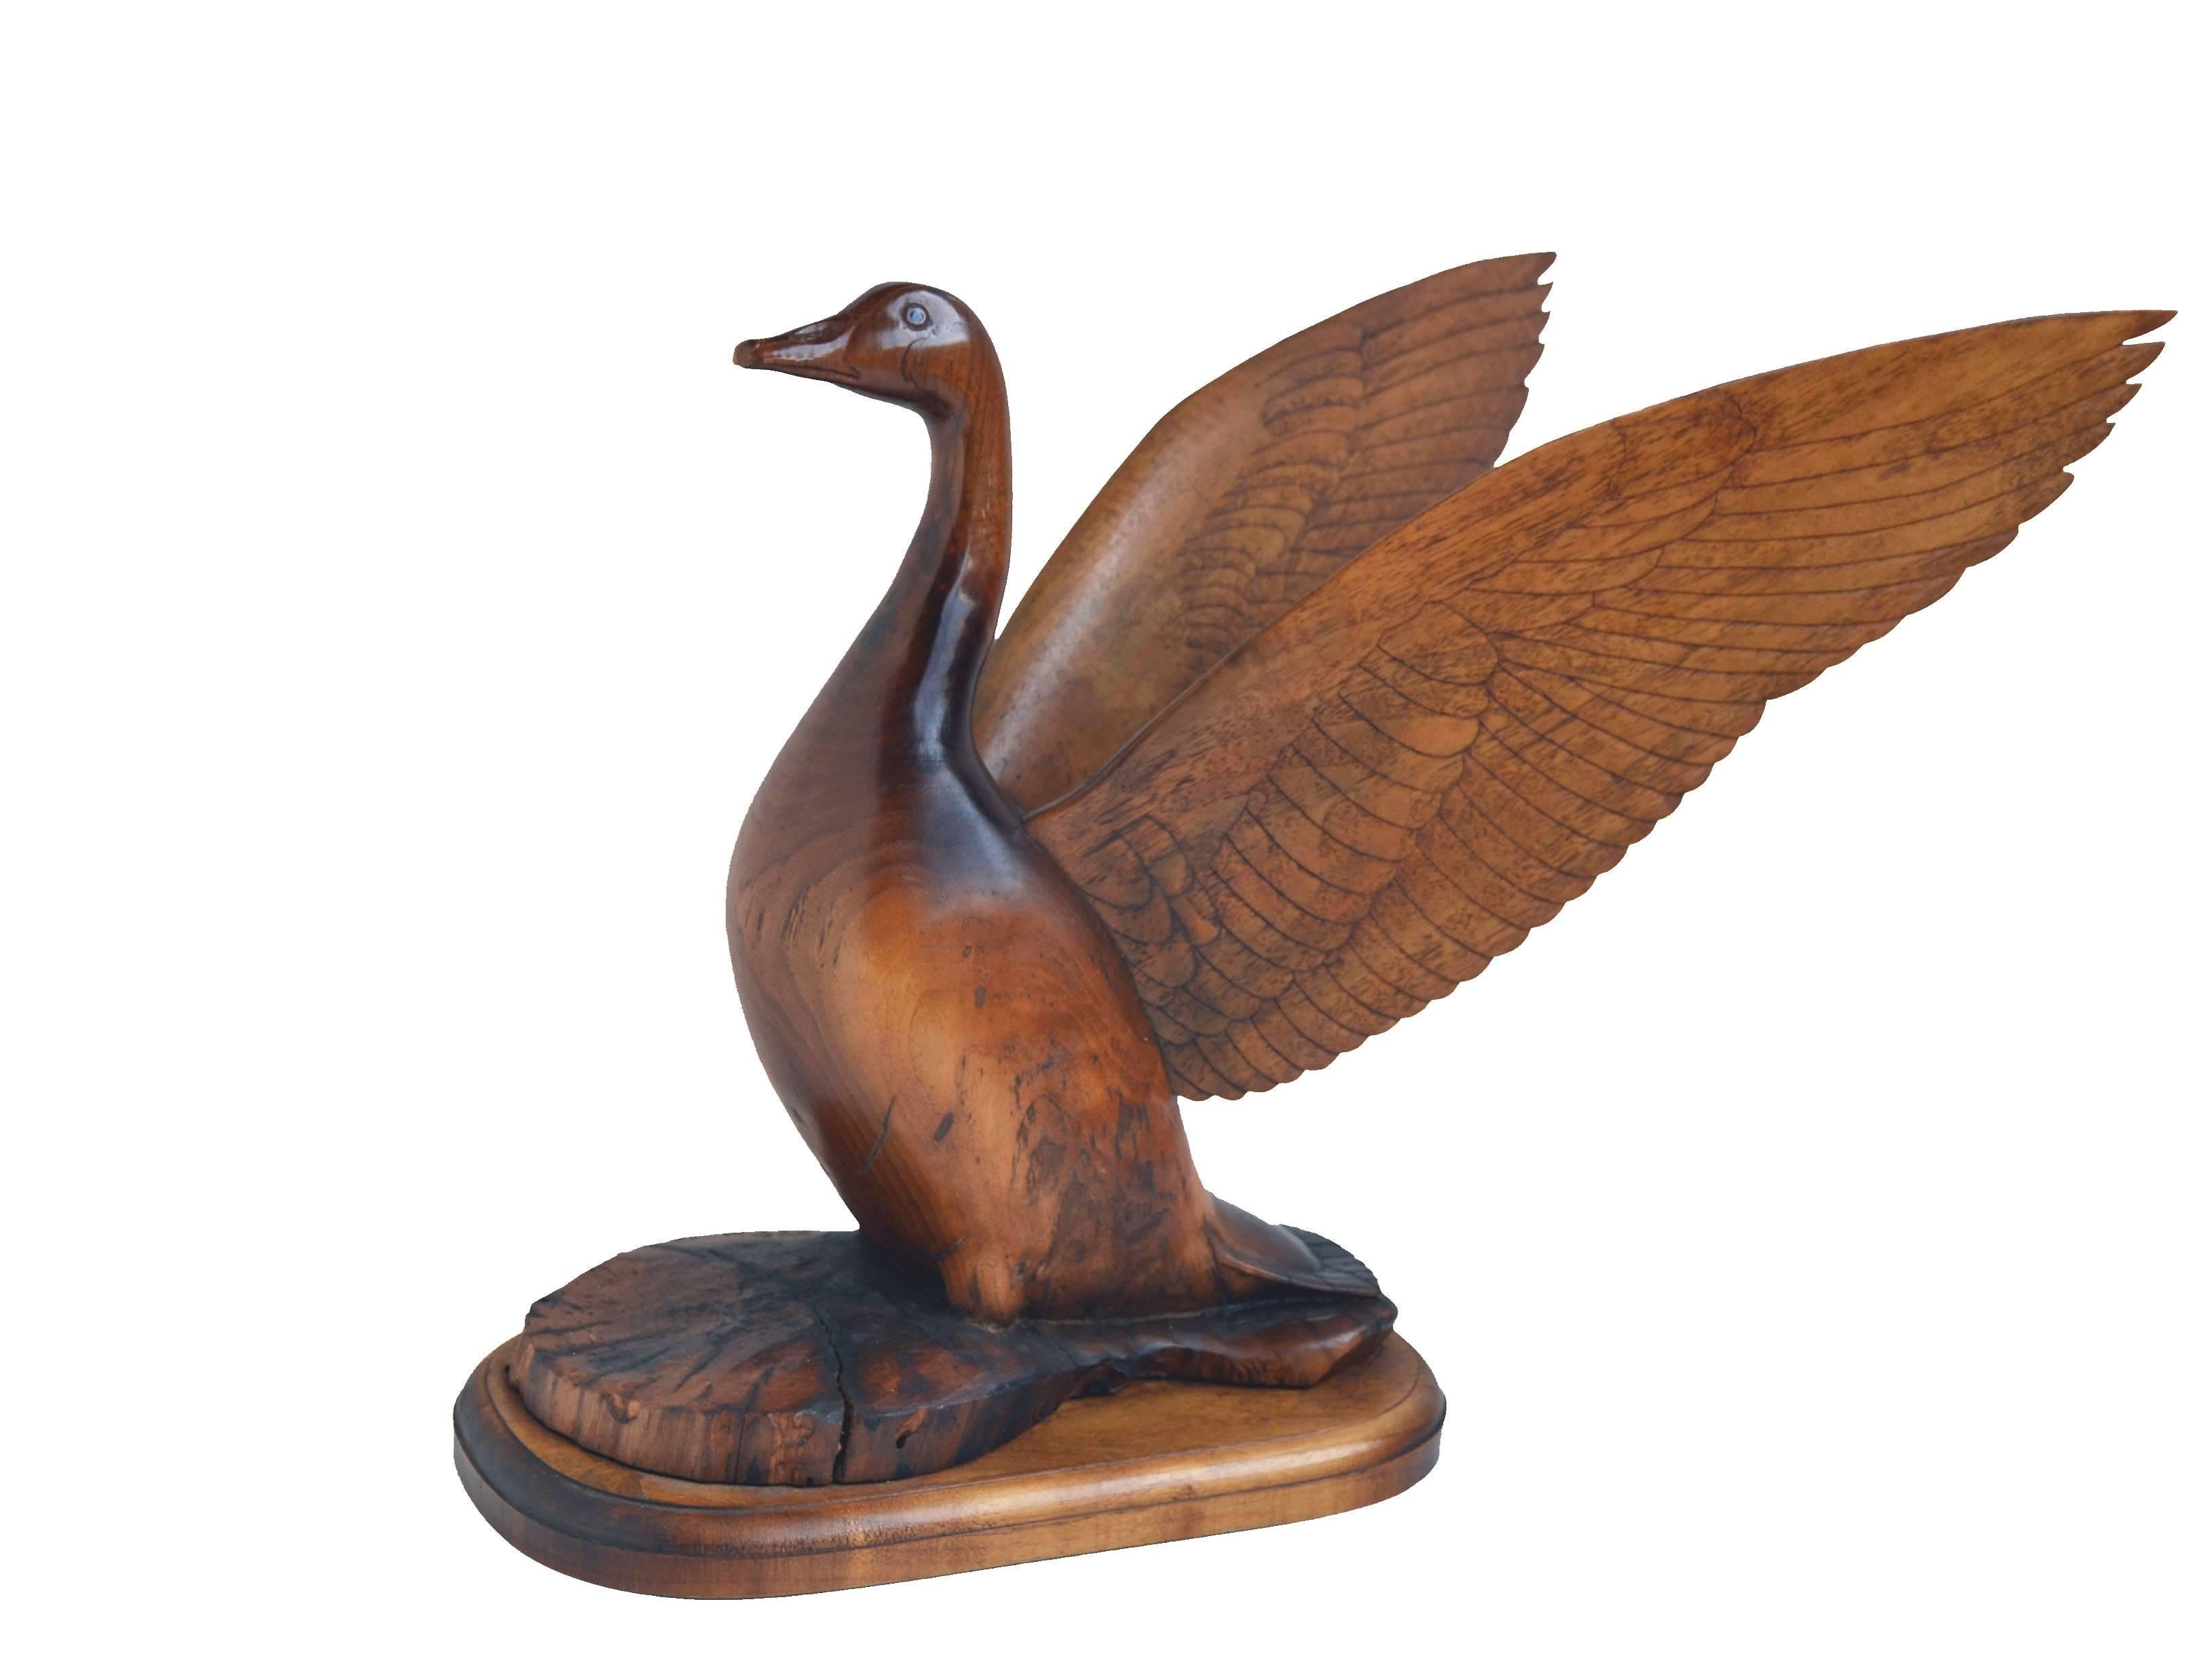 A beautiful, high polished sculpture of a goose with outstretched wings by Dale Eugene Schoth (American, 1925-1984). Appropriate to view in the round. Signed and dated by the artist 